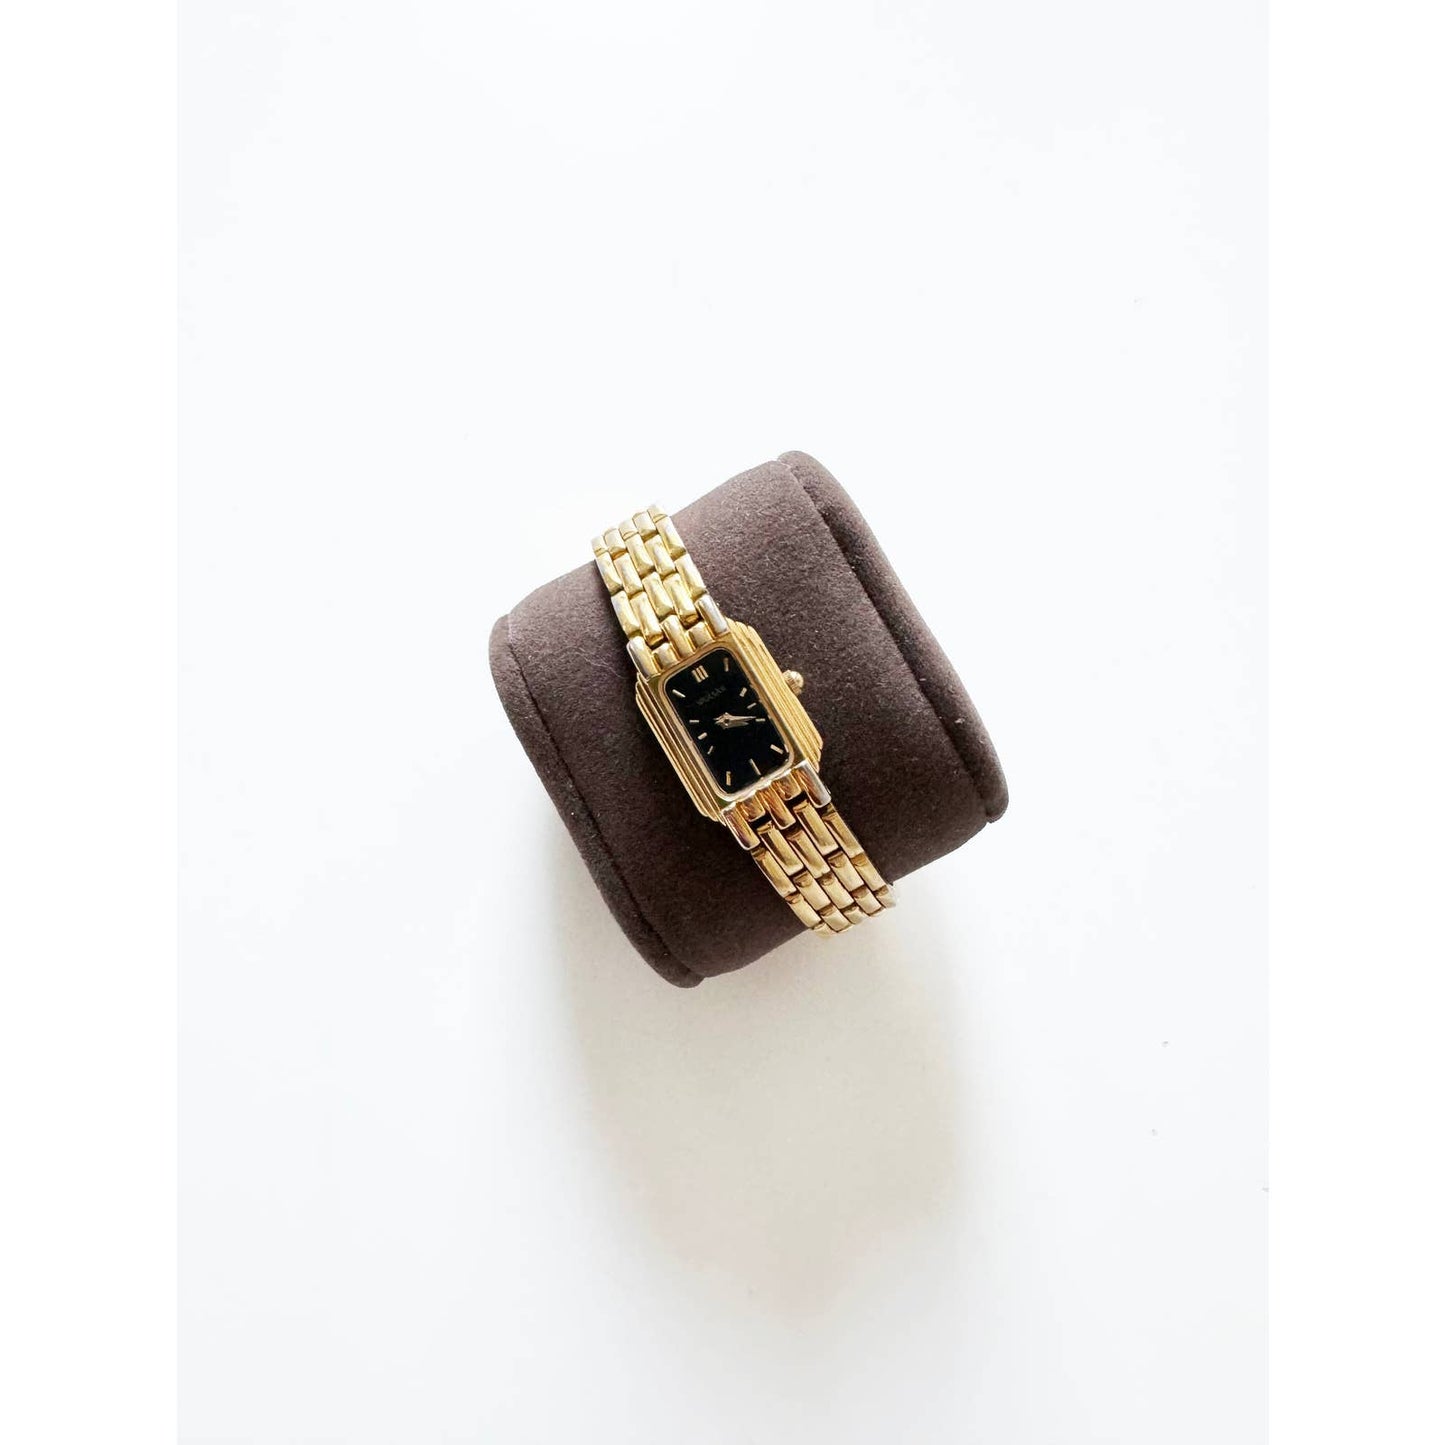 Vintage 90s Small Black and Gold Watch with Rectangular Face | Pulsar